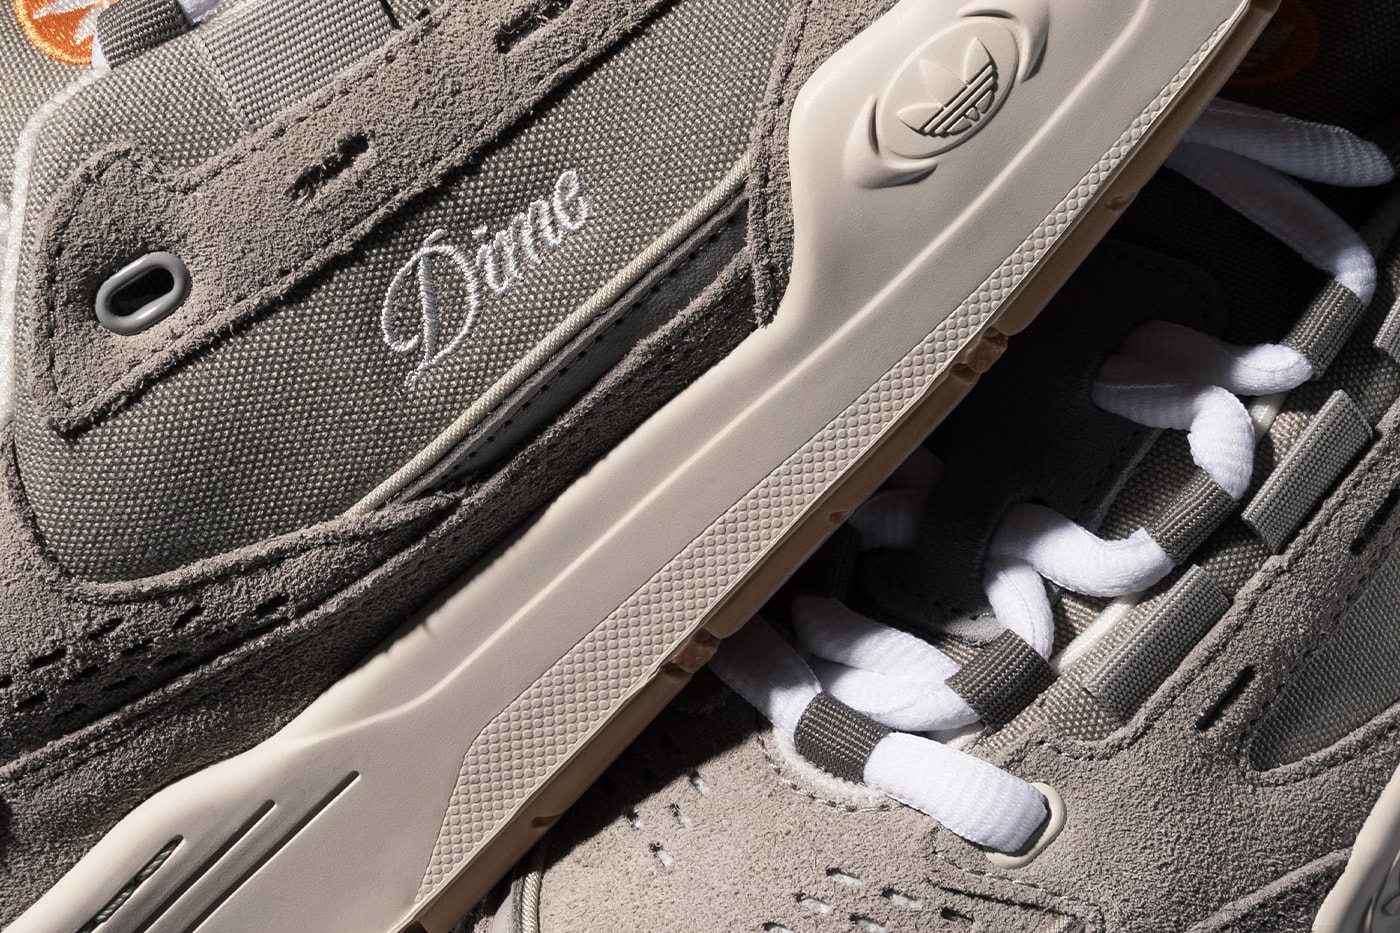 Dime and adidas Take it Back to the 2000s With a ADI2000 Collaboration IE4012 Lt. Granite/Ftw Wht/Chalk montreal canadian skateboard skatewear skate shoe